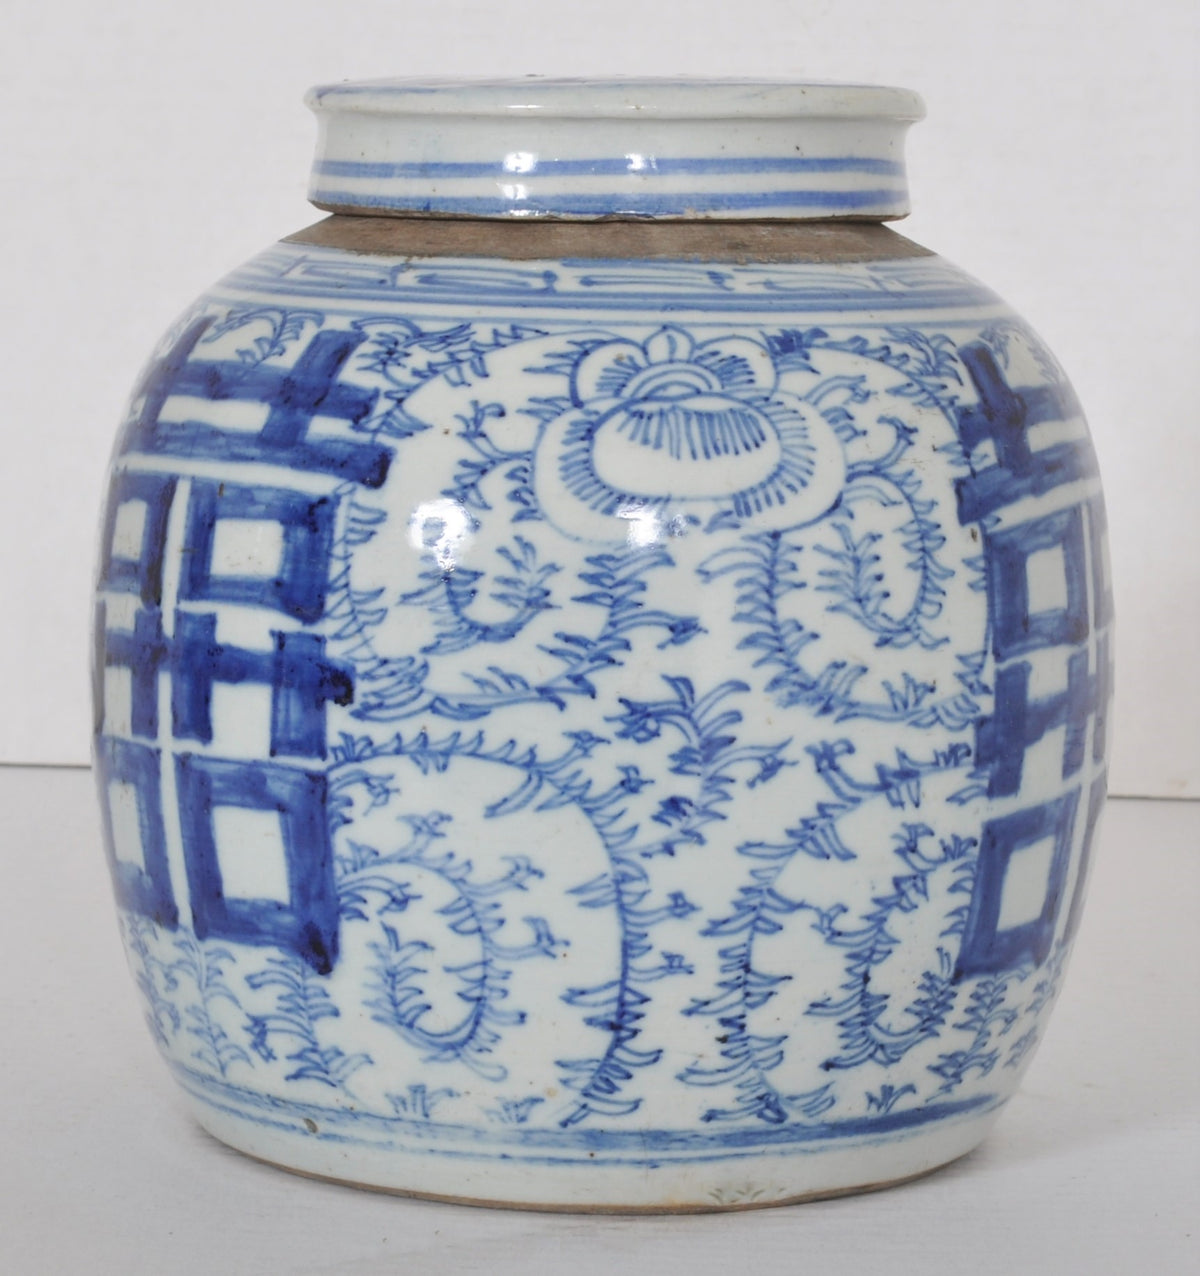 Antique Chinese Qing Dynasty Blue & White Porcelain Ginger Jar with Double Happiness Symbol, Circa 1870